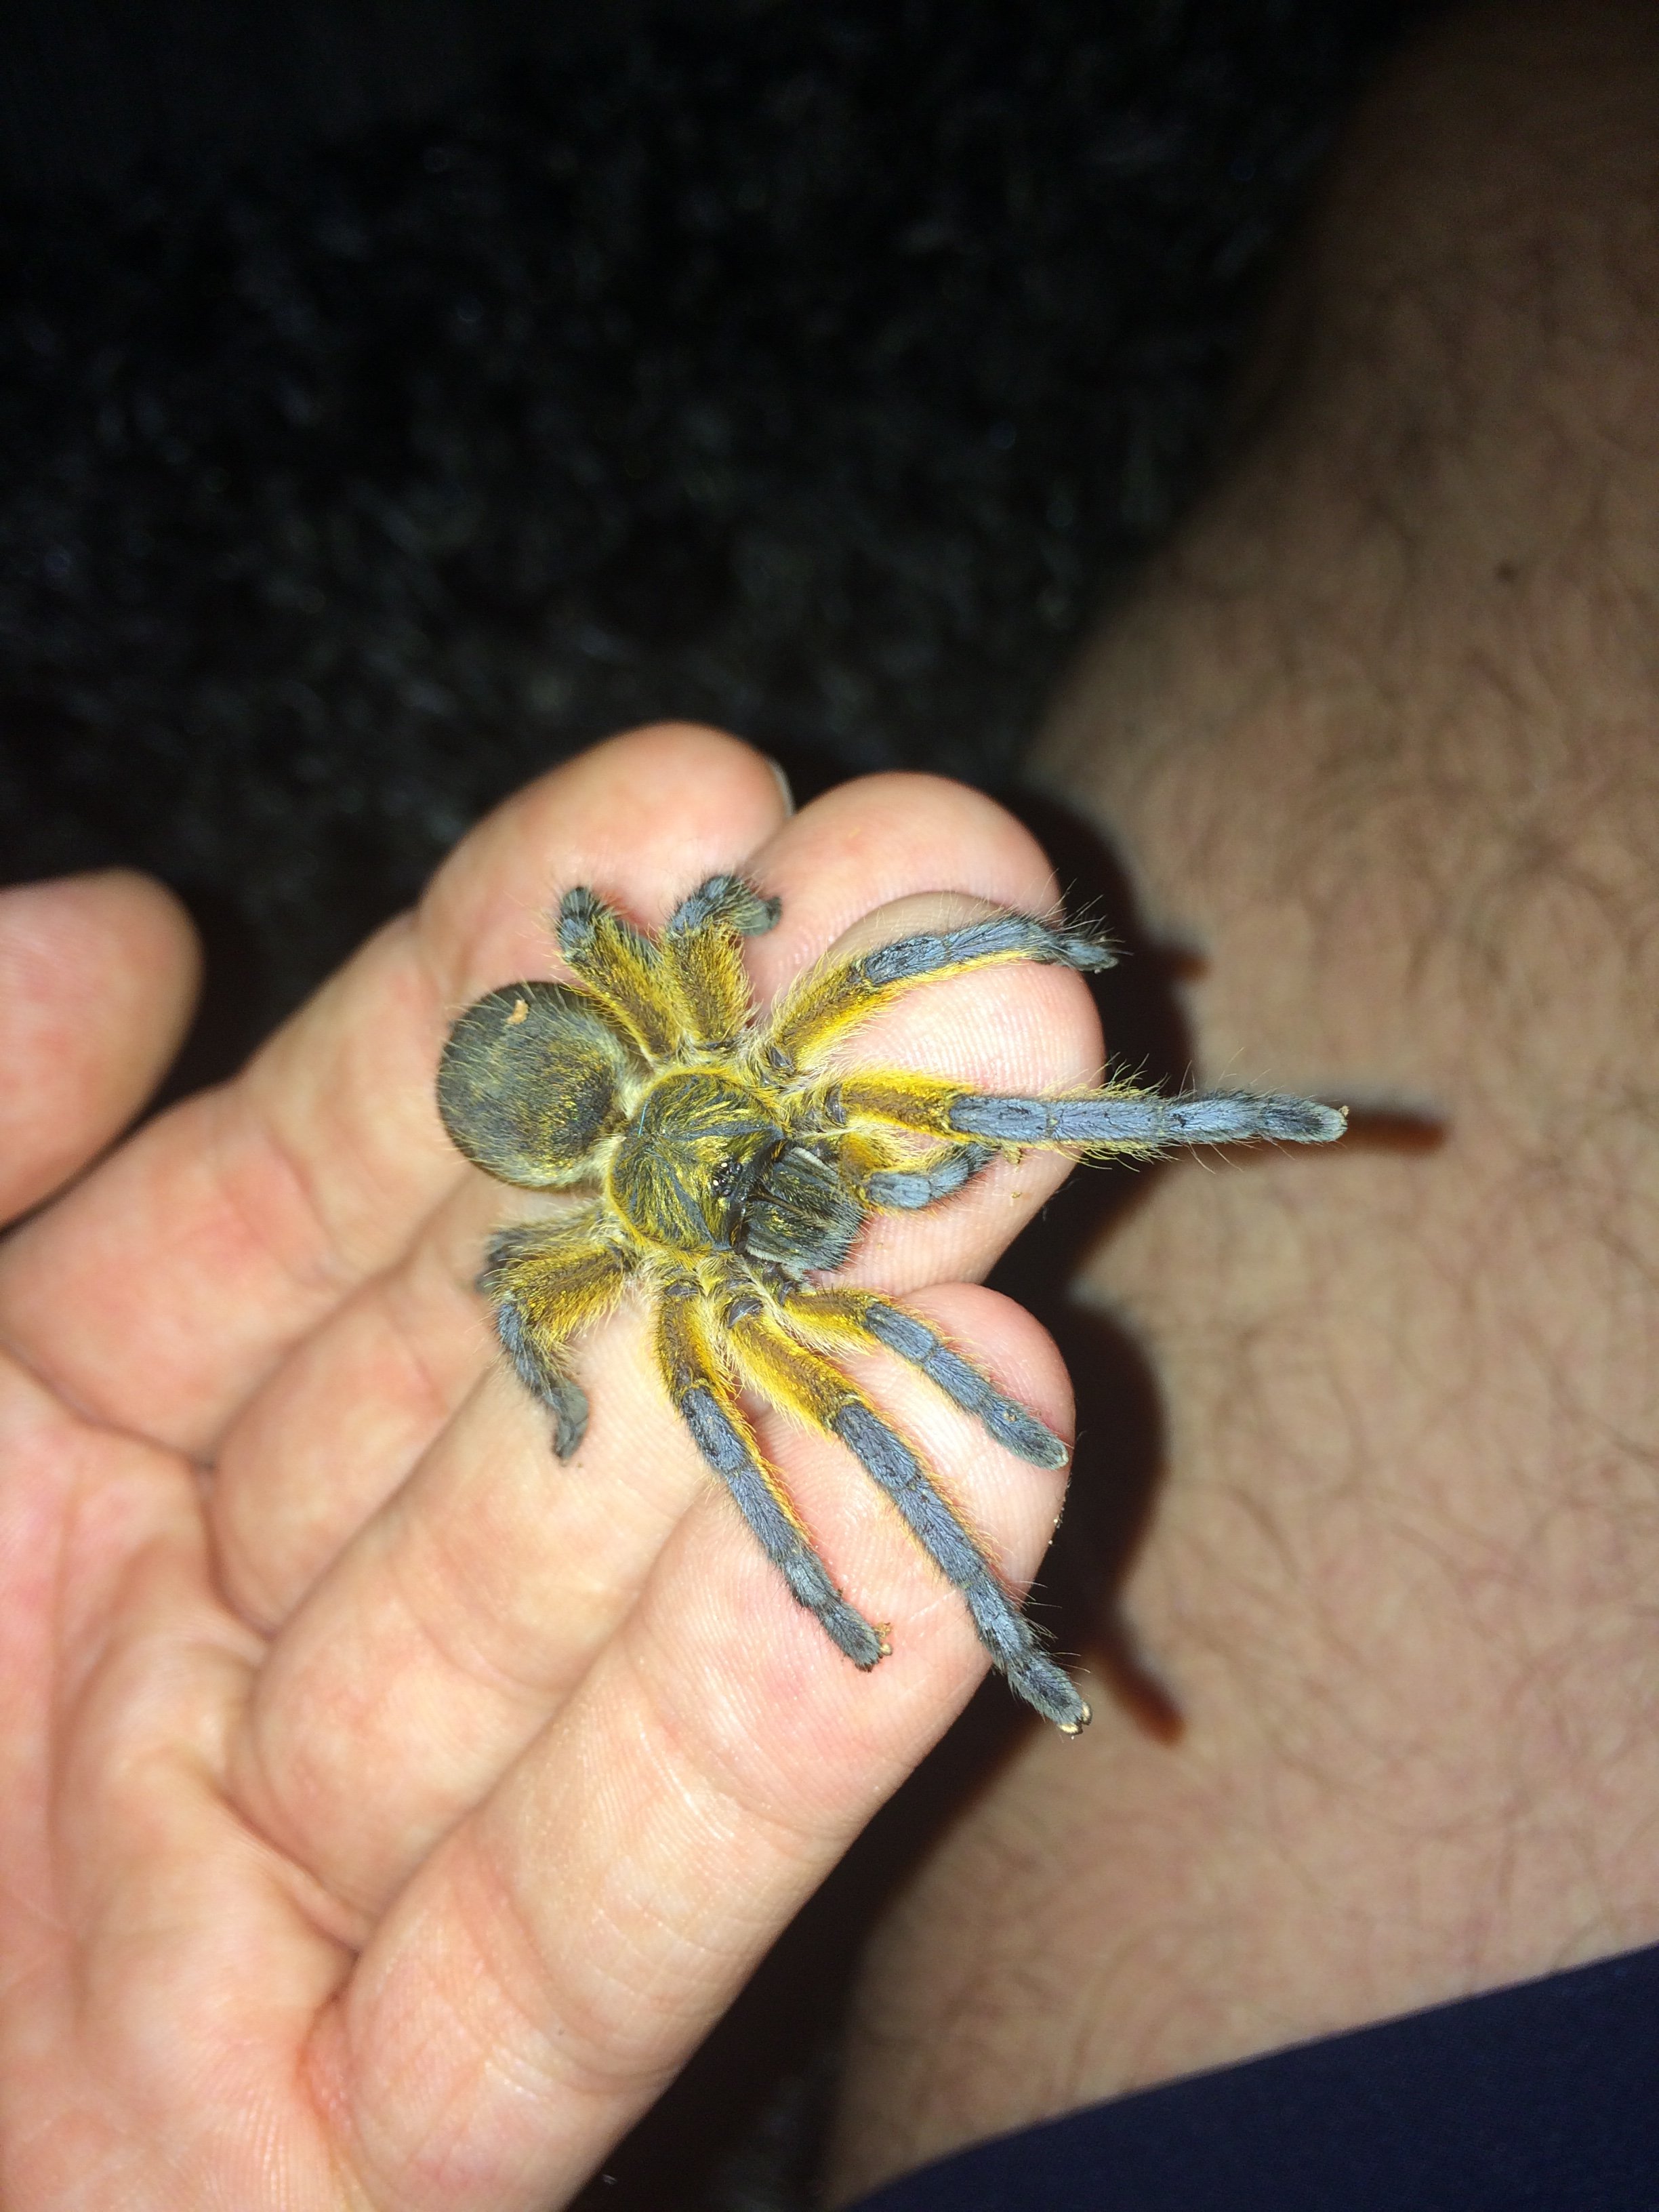 Harpacteria Pulchripes